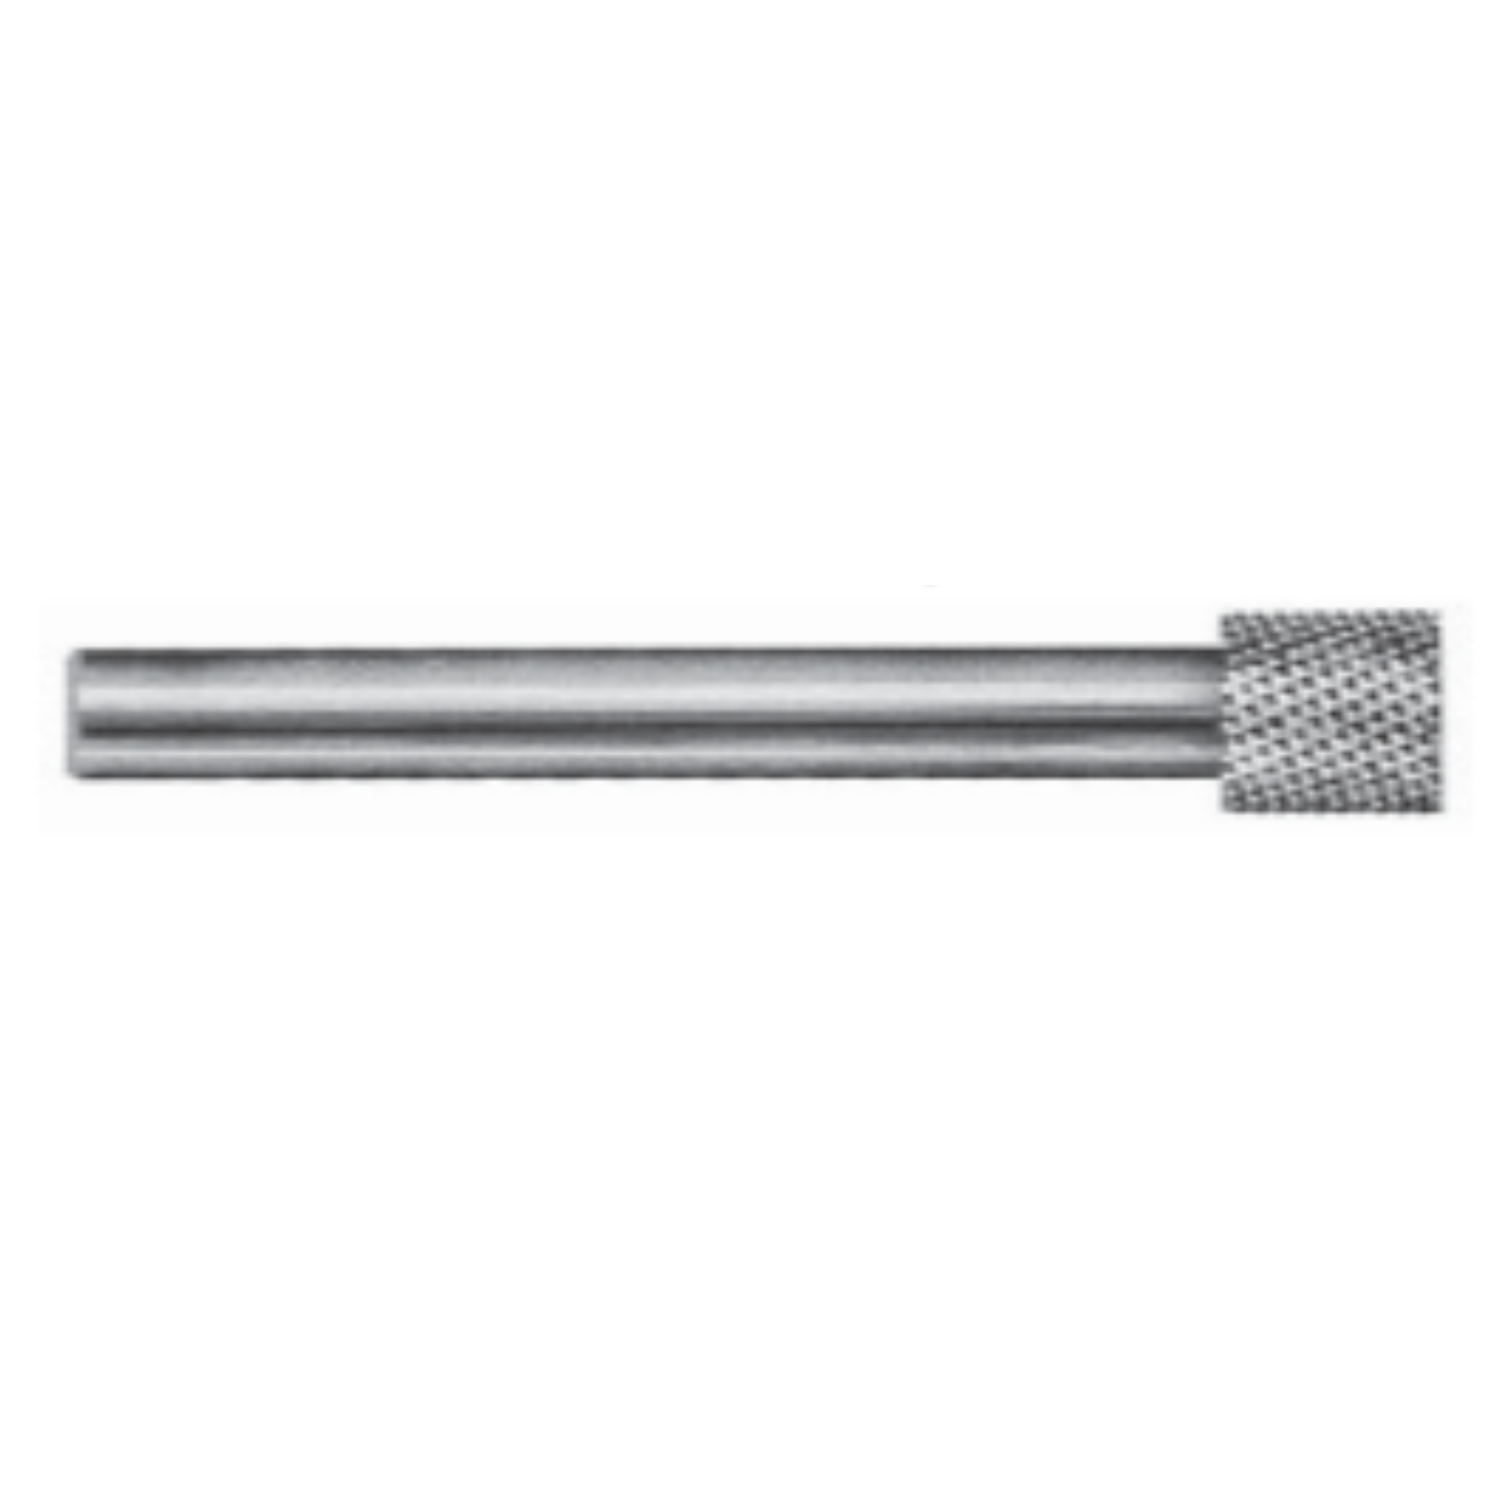 YEW AIK Series 231 Diamond Pattern Solid Carbide - Premium Diamond Pattern Solid Carbide from YEW AIK - Shop now at Yew Aik.